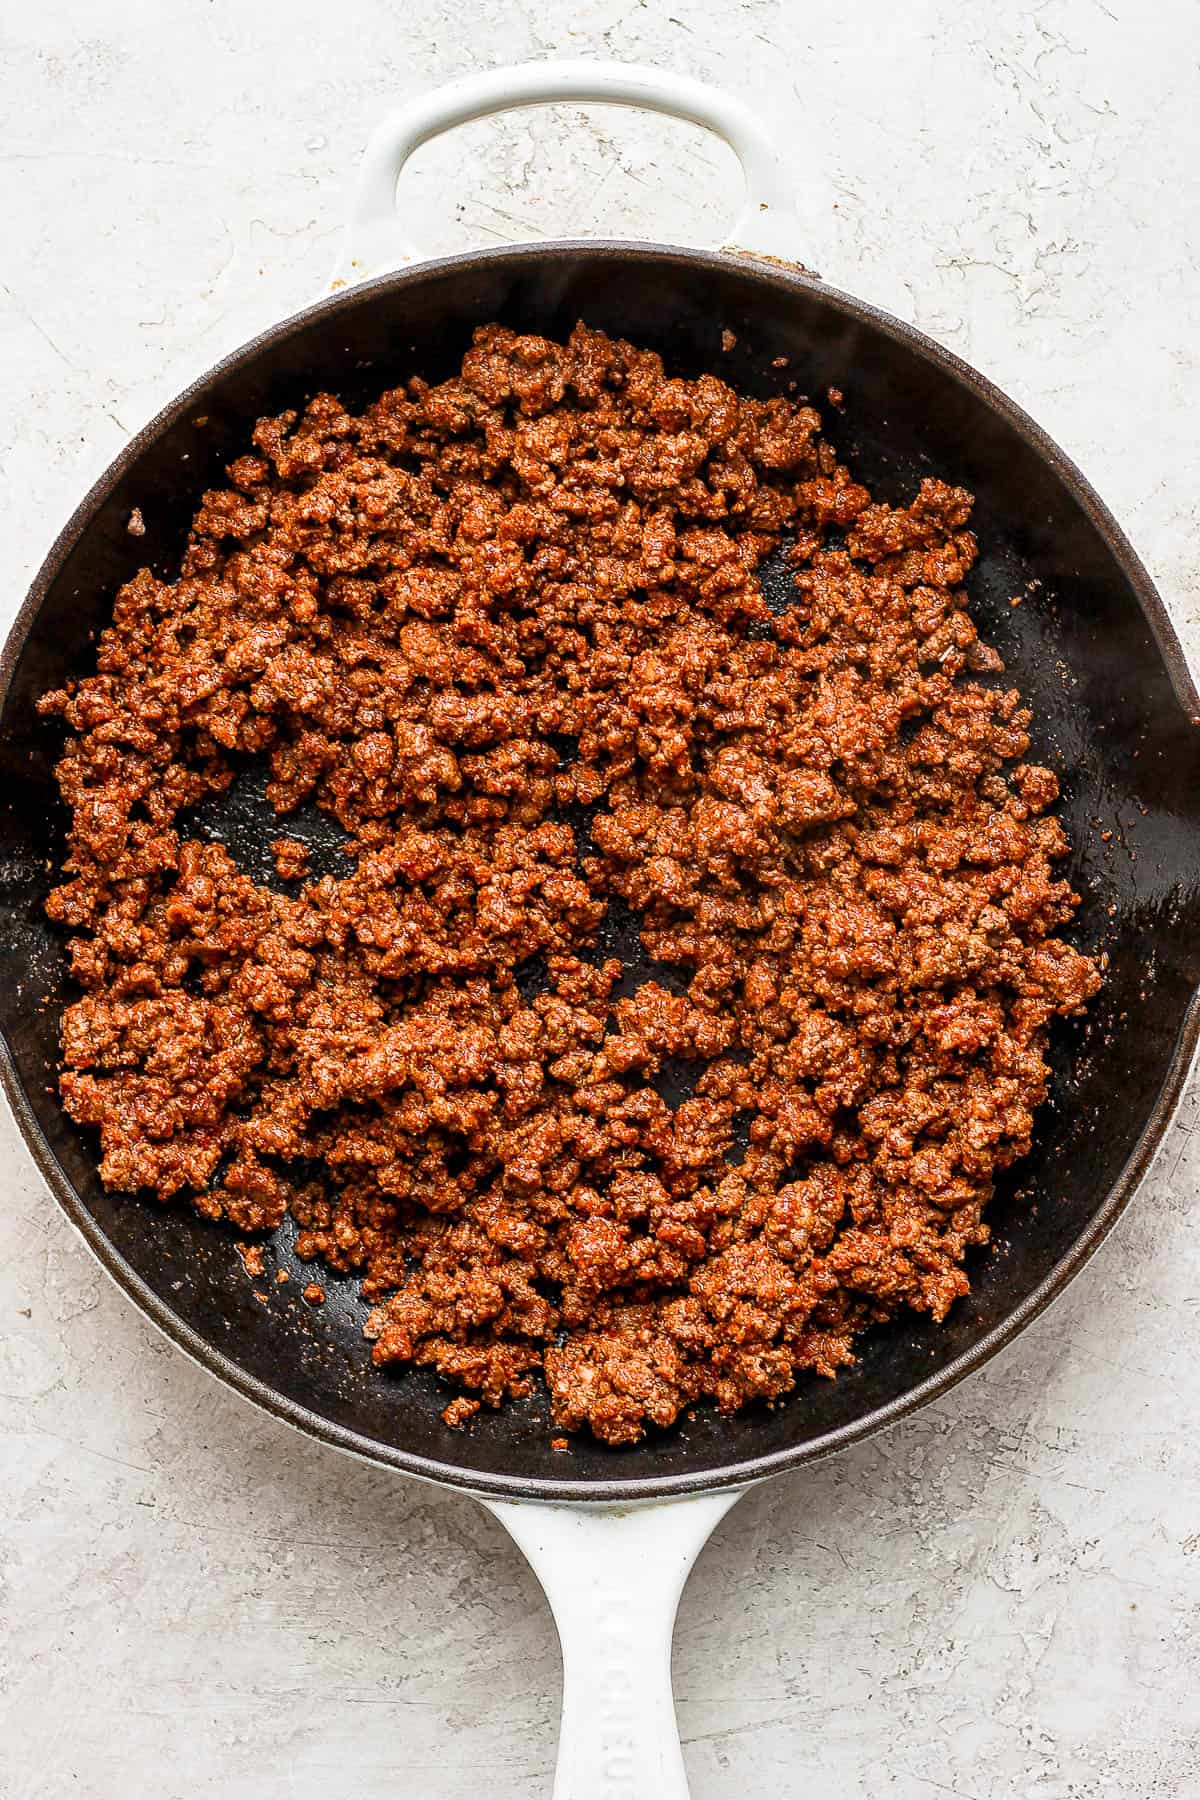 Seasonings mixed throughout the ground beef.